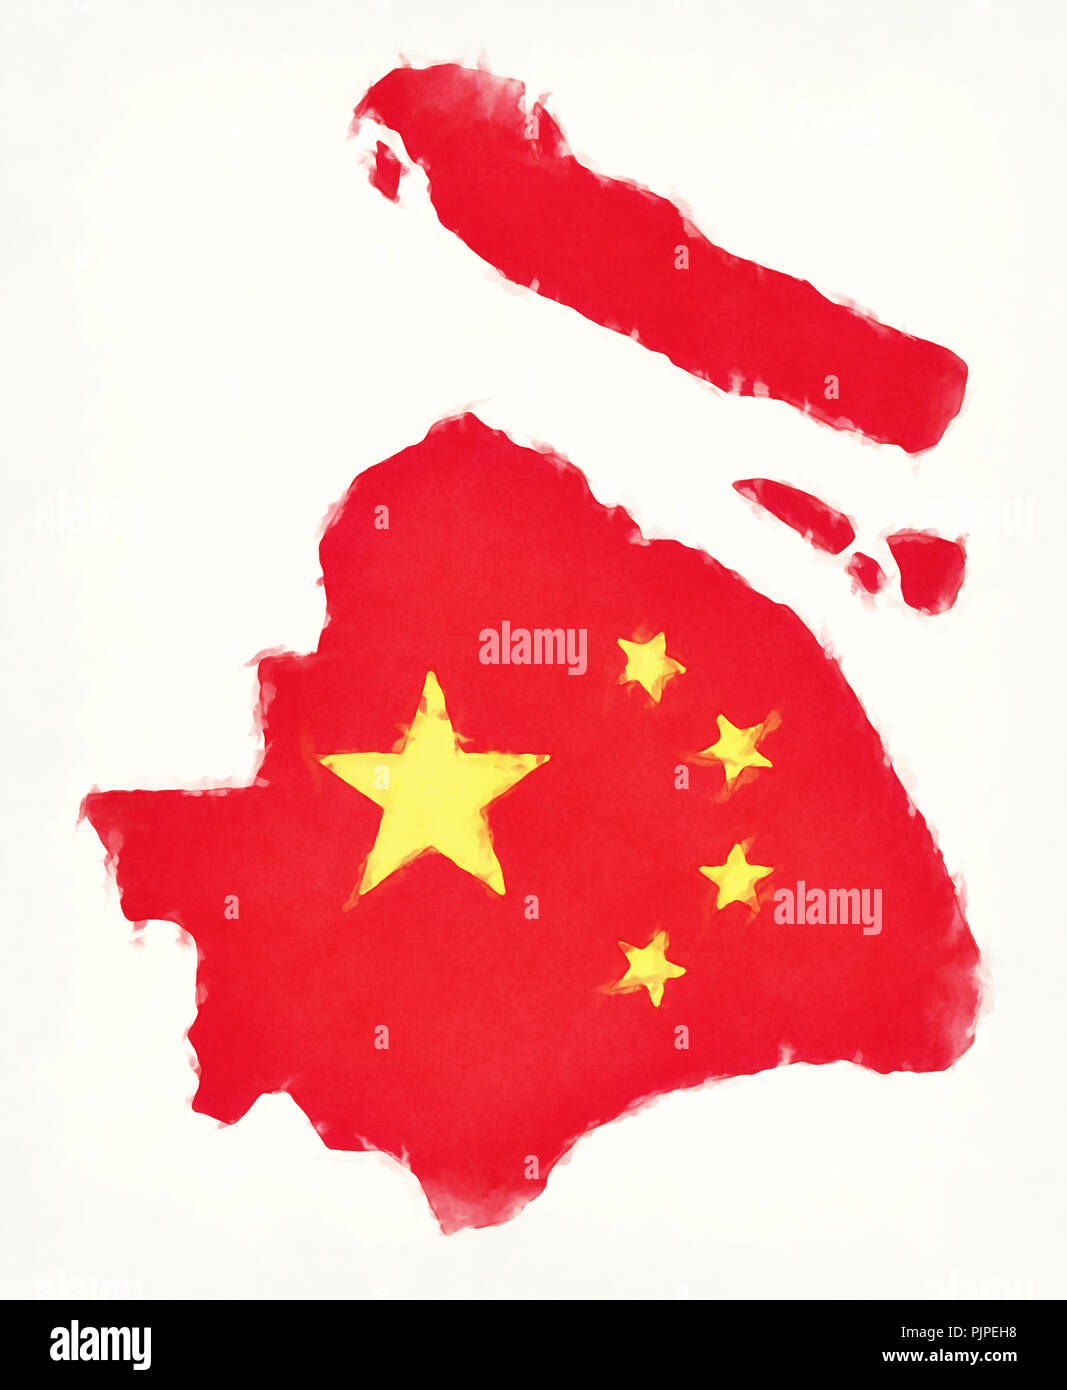 Shanghai China watercolor map with Chinese national flag illustration Stock Photo